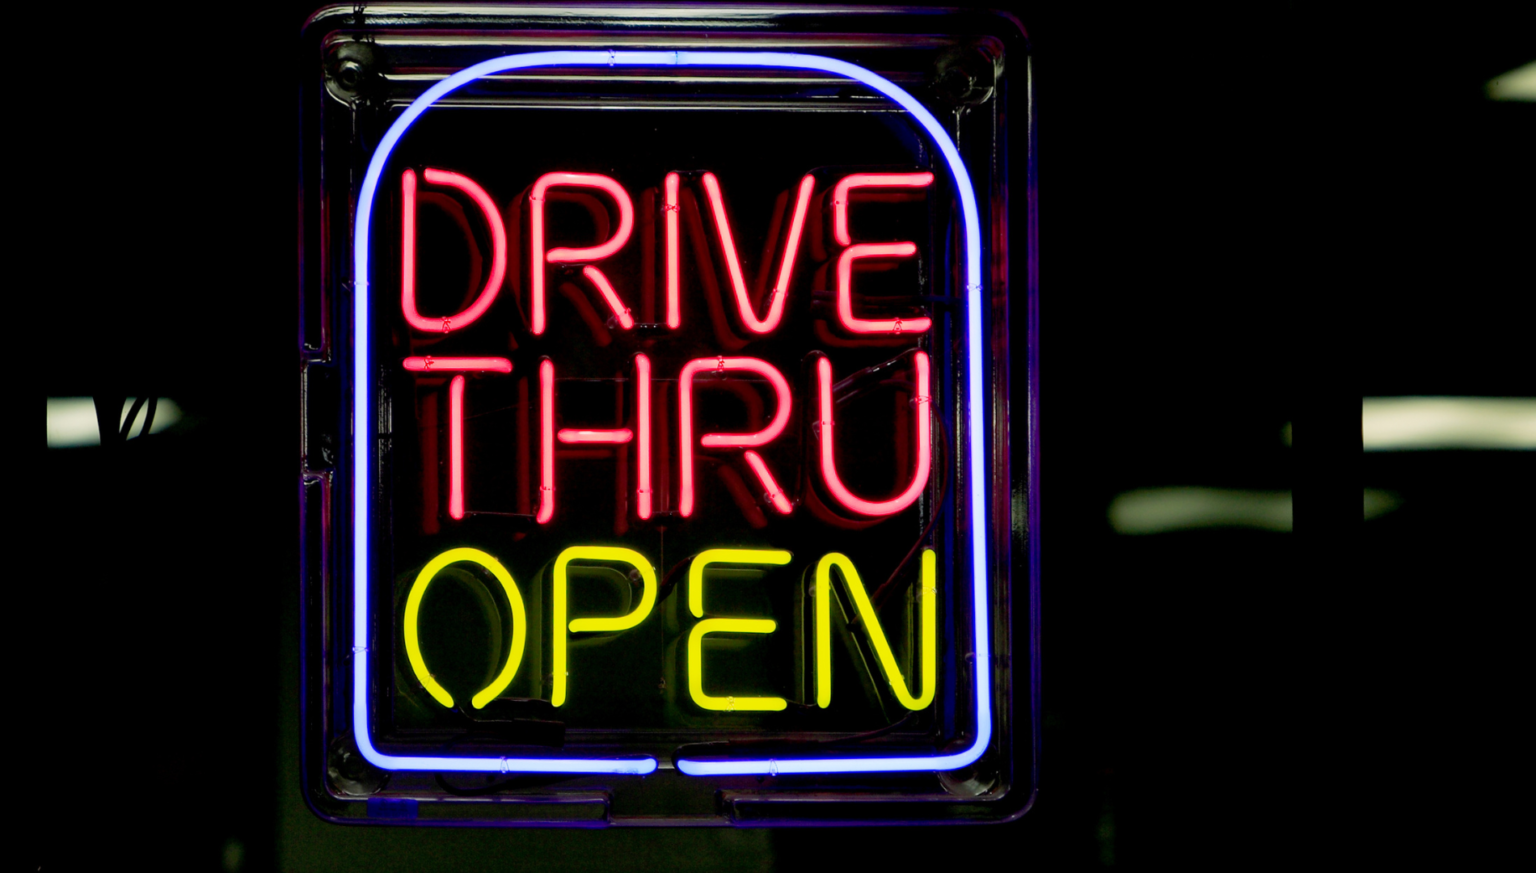 Drive-thru Operating Hours Text (3)